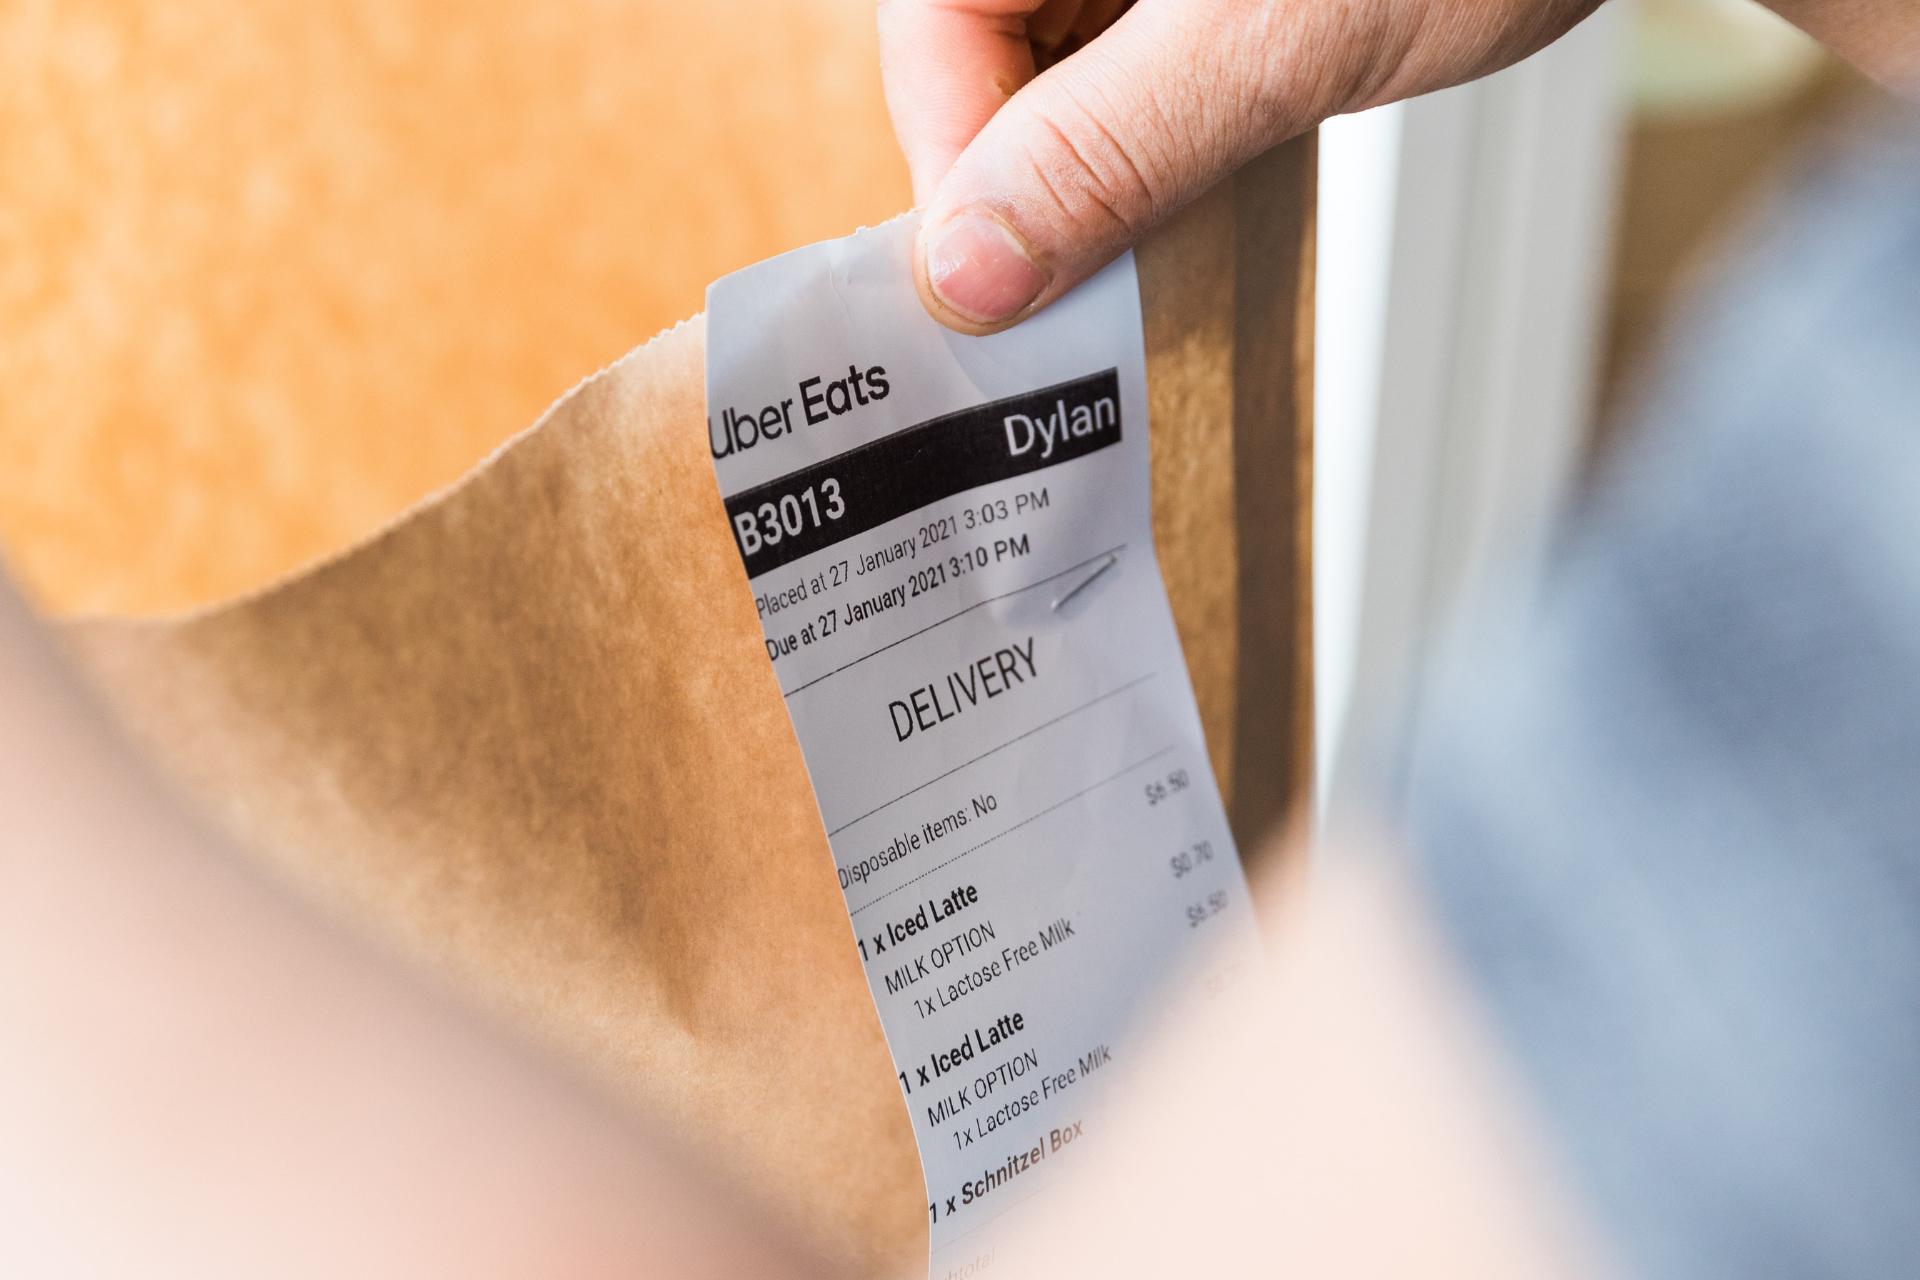  Restaurant customer checking a receipt he received with the order